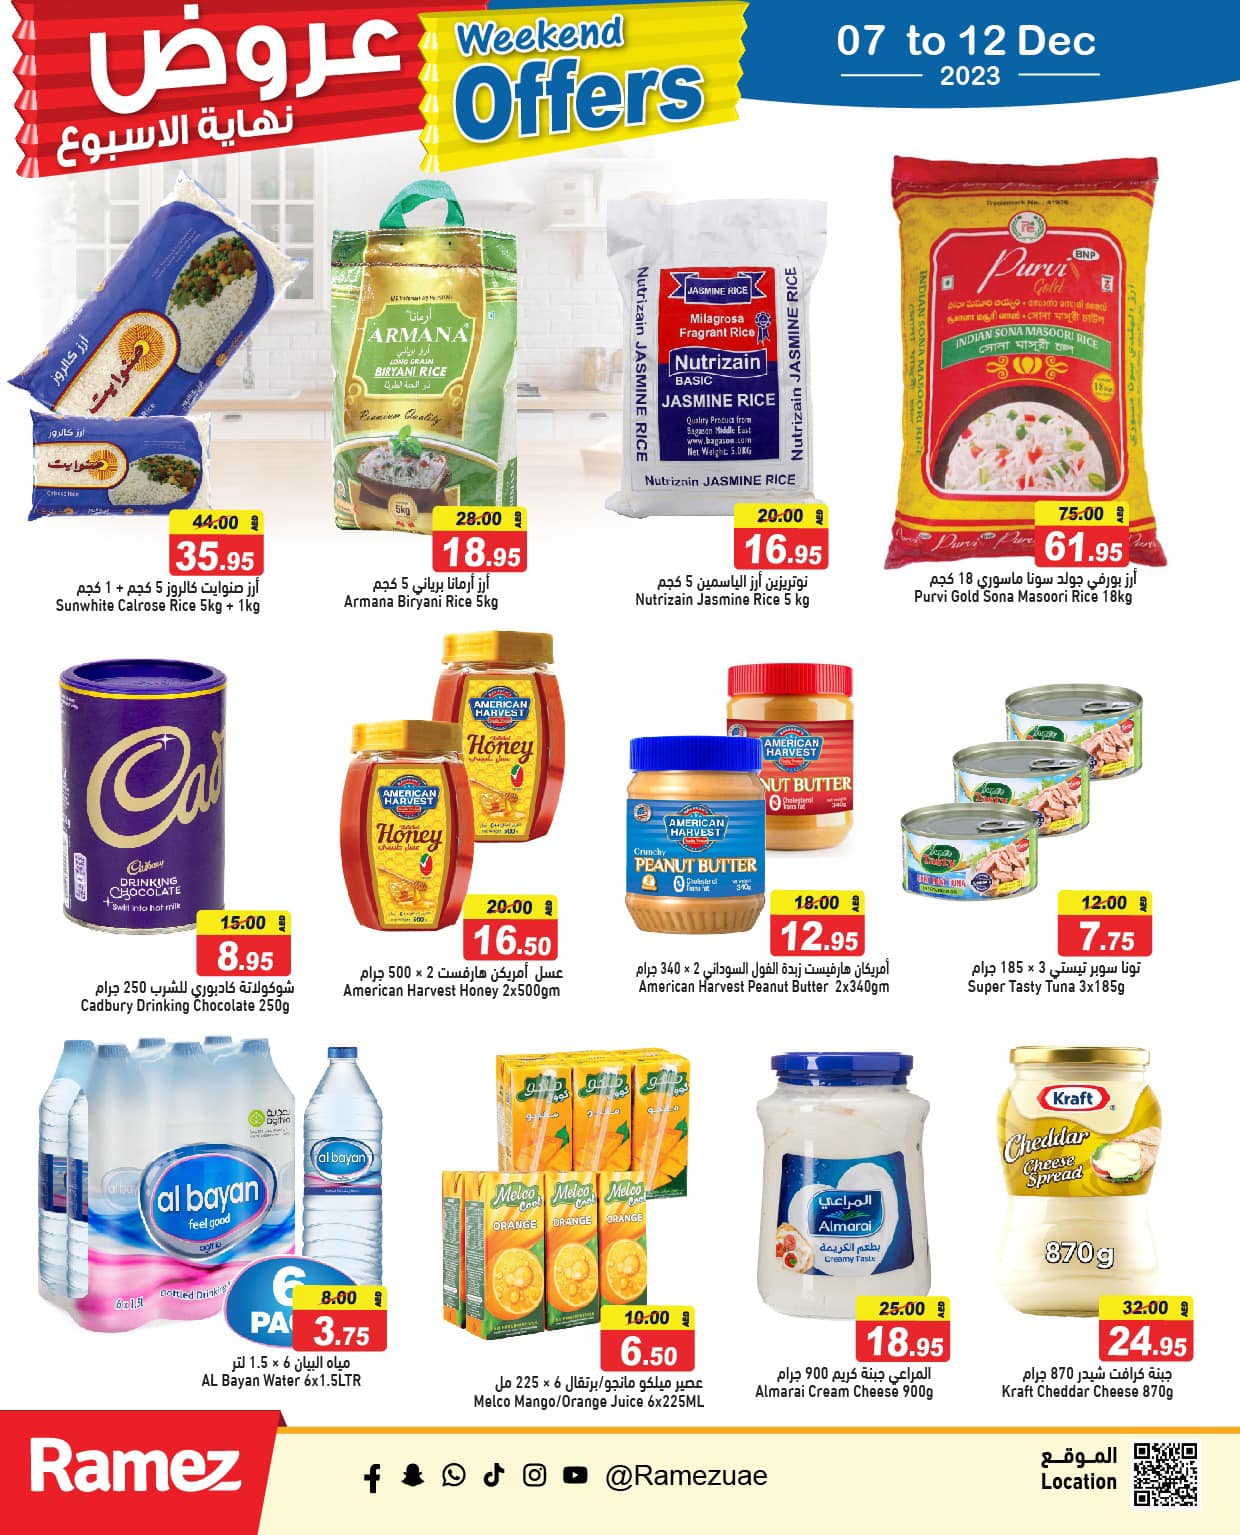 Page 2 at Weekend offers at Ramez UAE